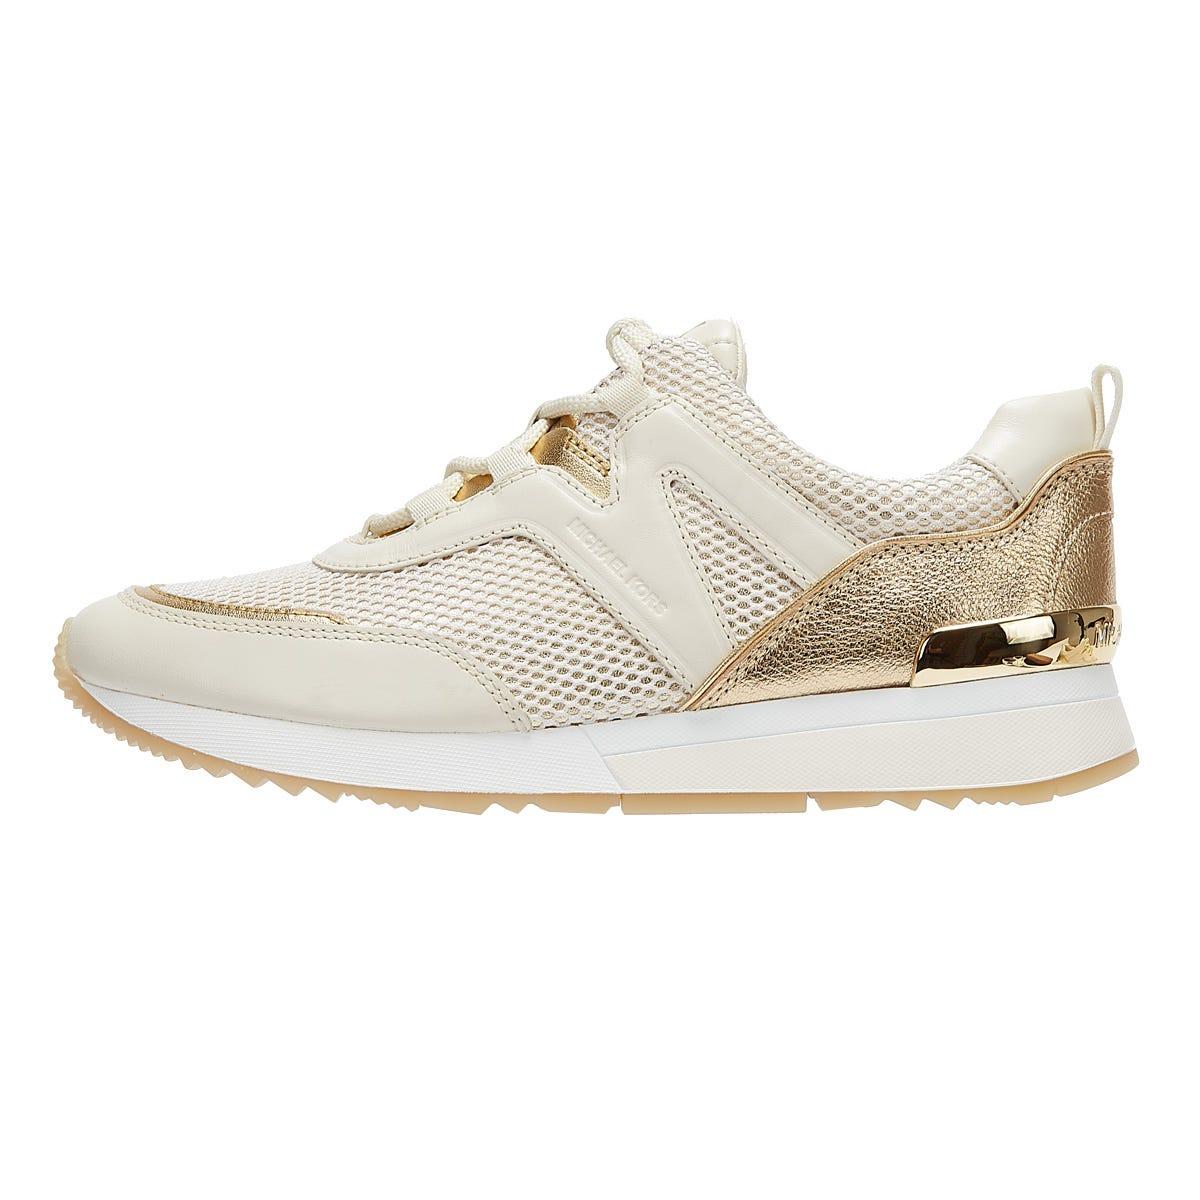 Michael Kors Leather Pippin Womens White / Gold Trainers - Lyst